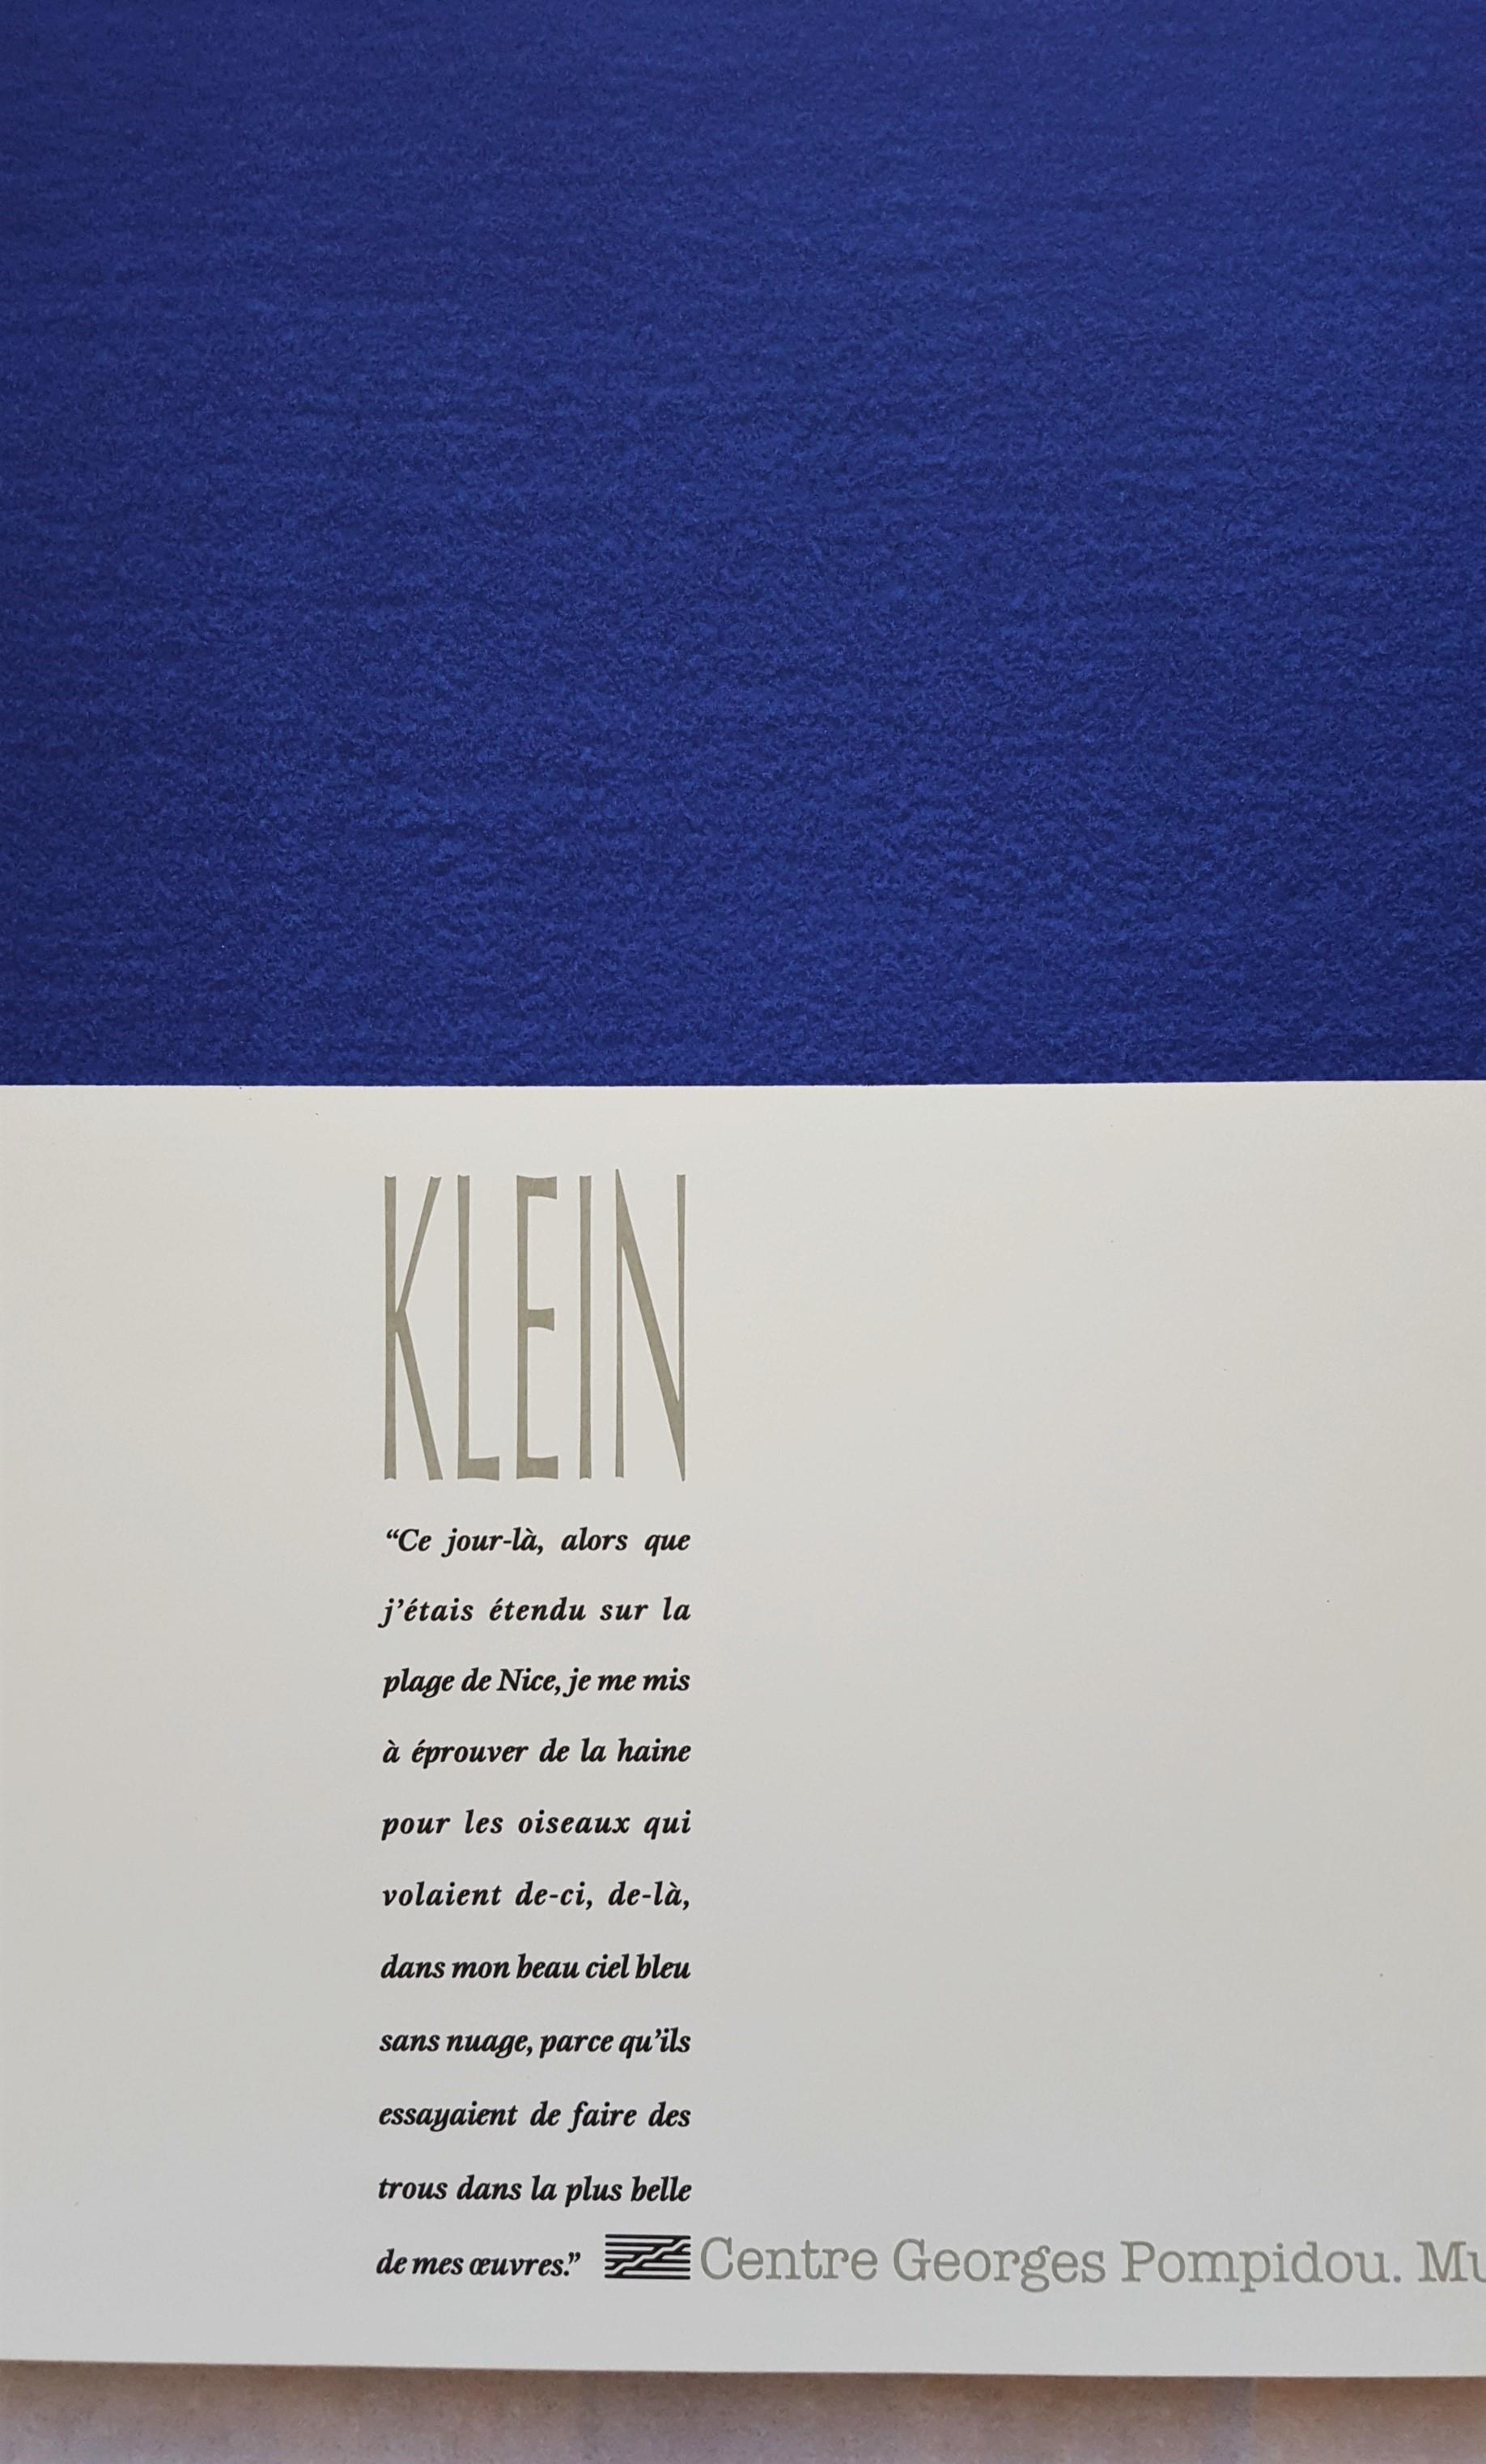 A vintage exhibition poster (handmade four color lithography on heavy wove paper) after French artist Yves Klein (1928-1962) titled 